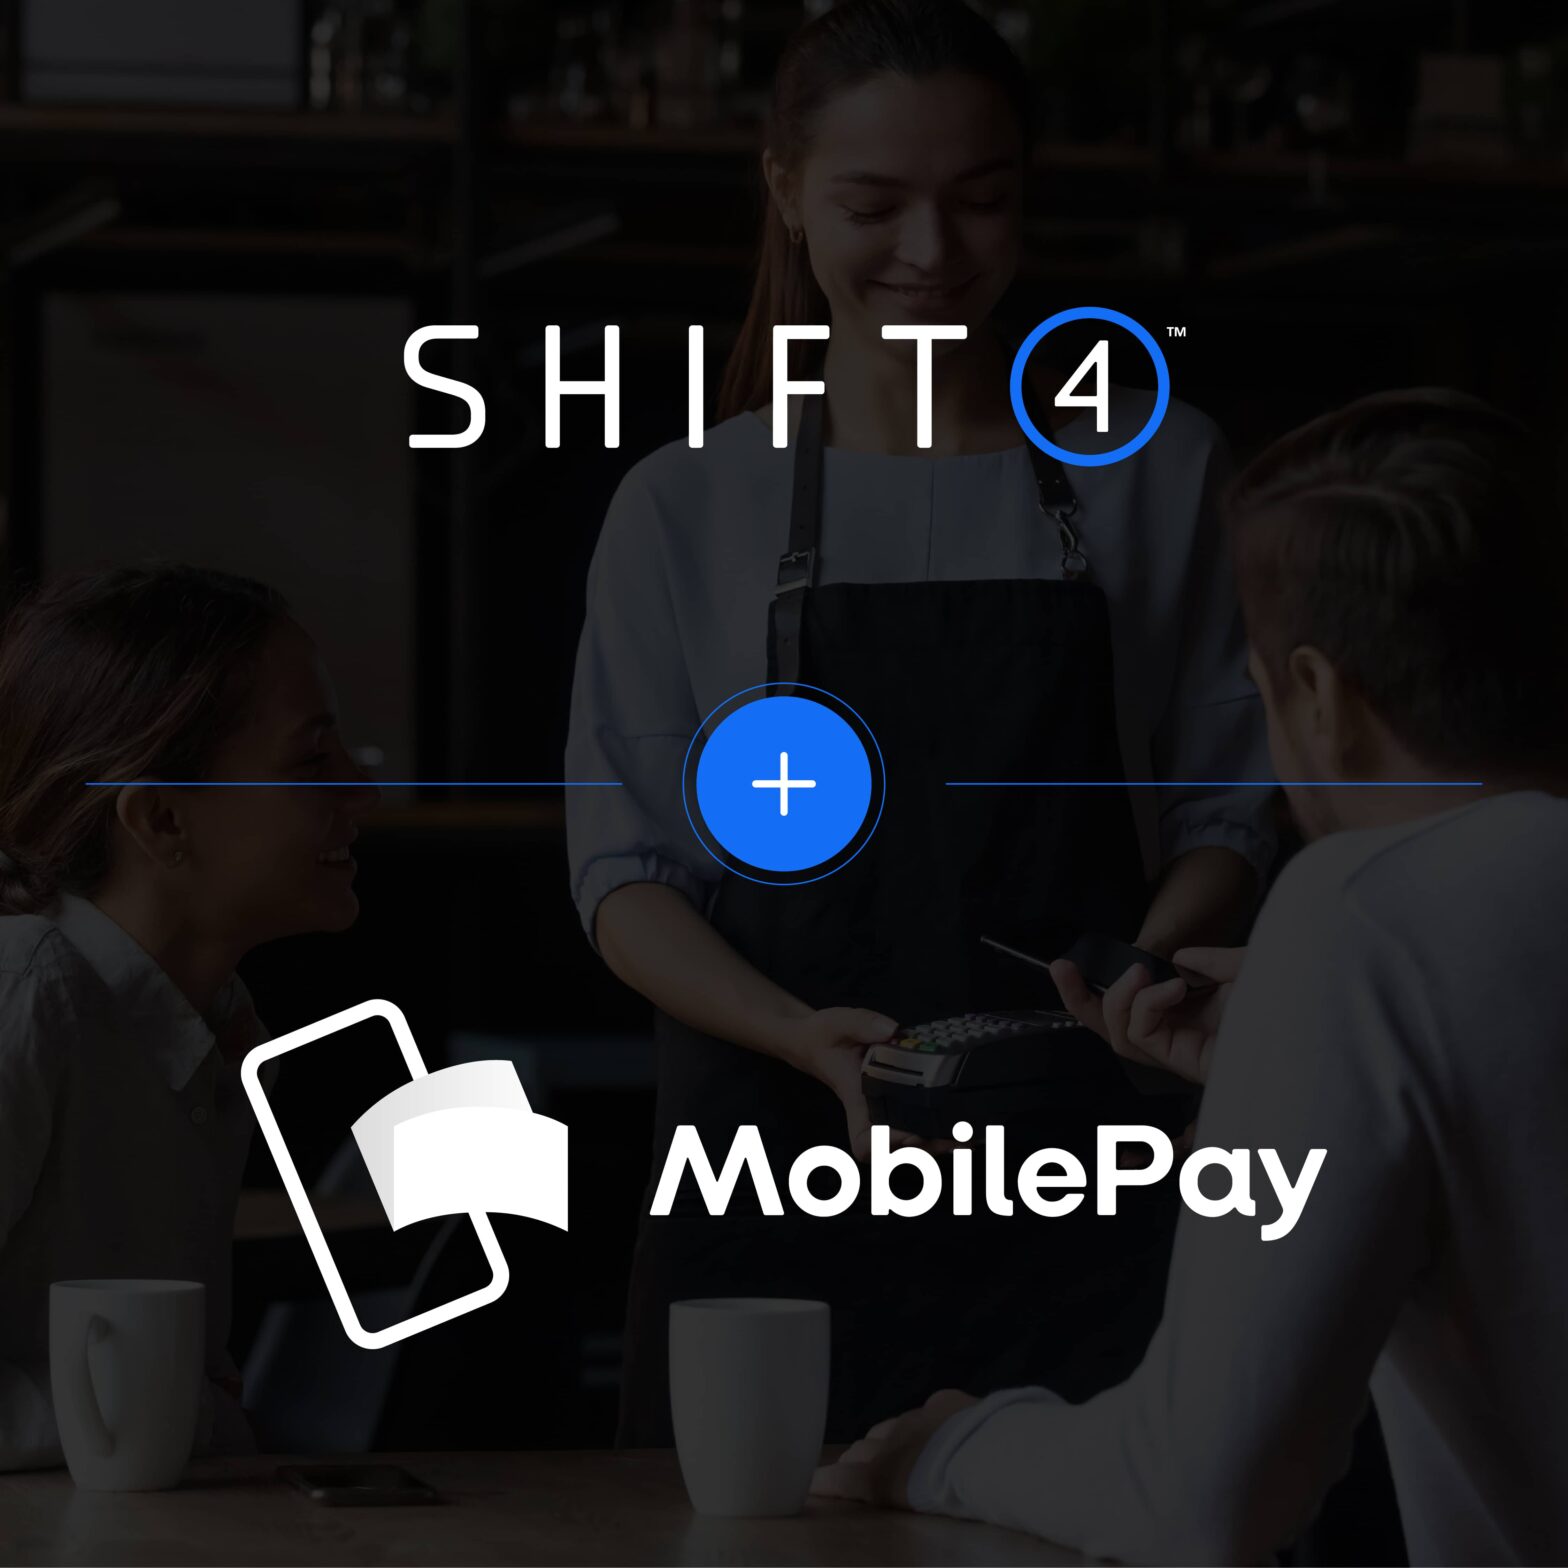 MobilePay partners with Shift4 image showing both logos